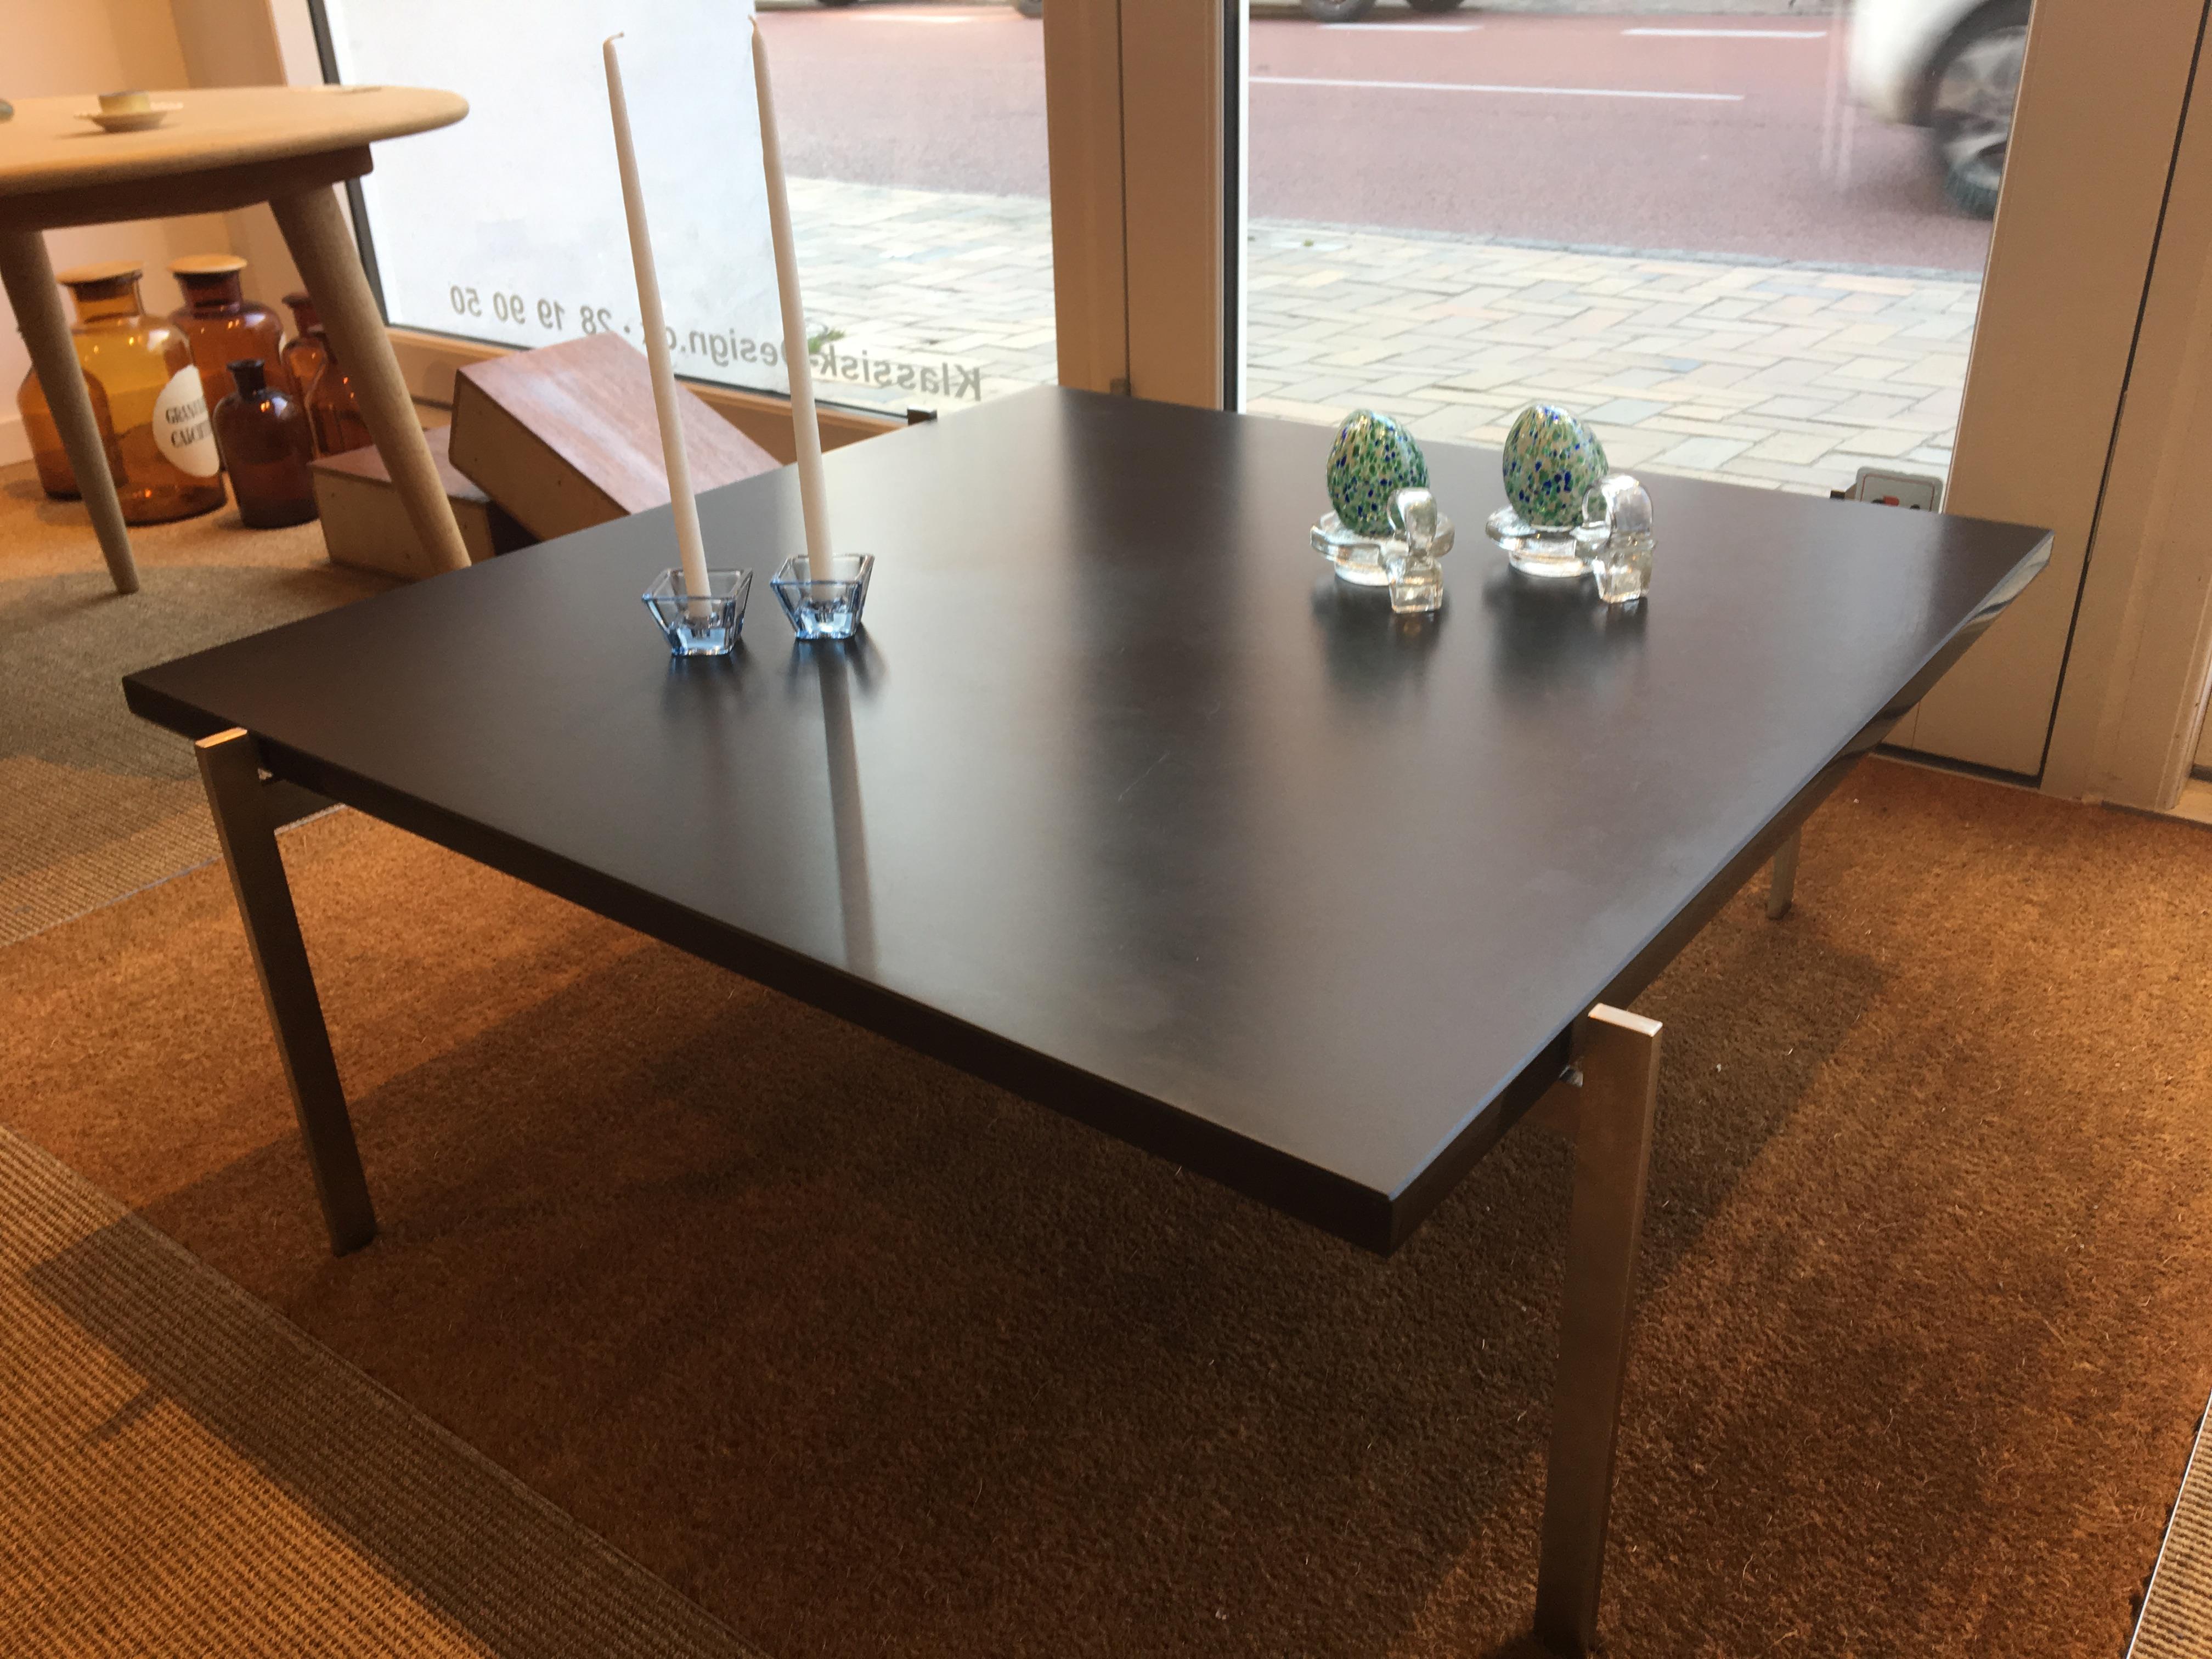 Coffee table by Poul Kjærholm for Fritz Hansen 2007, Danish steel and stoneware.
PK61 Poul Kjærholm coffee table is made of spring steel and polished slate plate with minimal traces of wear.
The table is in very fine condition with minimal traces